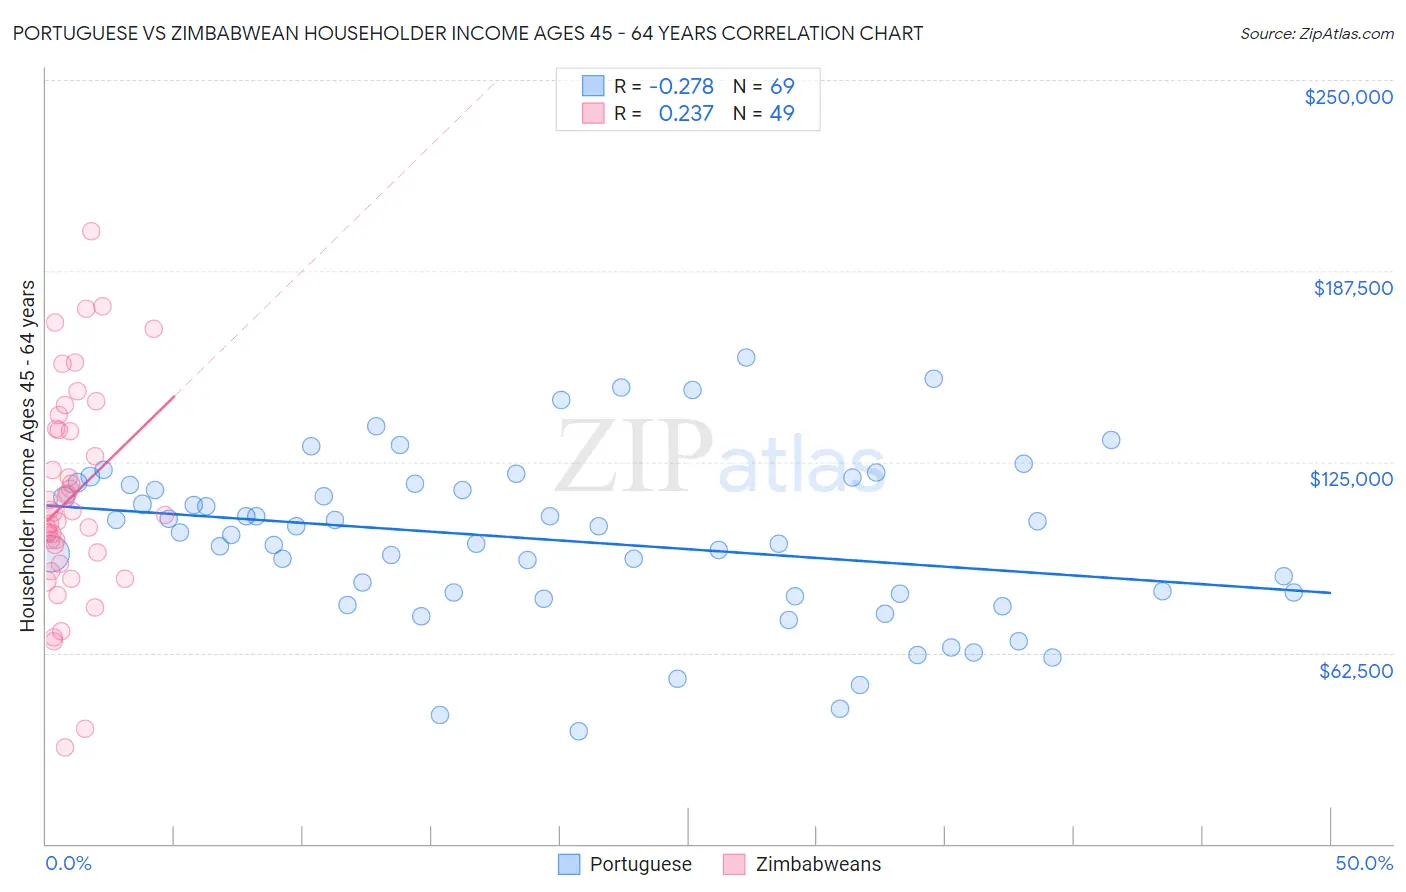 Portuguese vs Zimbabwean Householder Income Ages 45 - 64 years